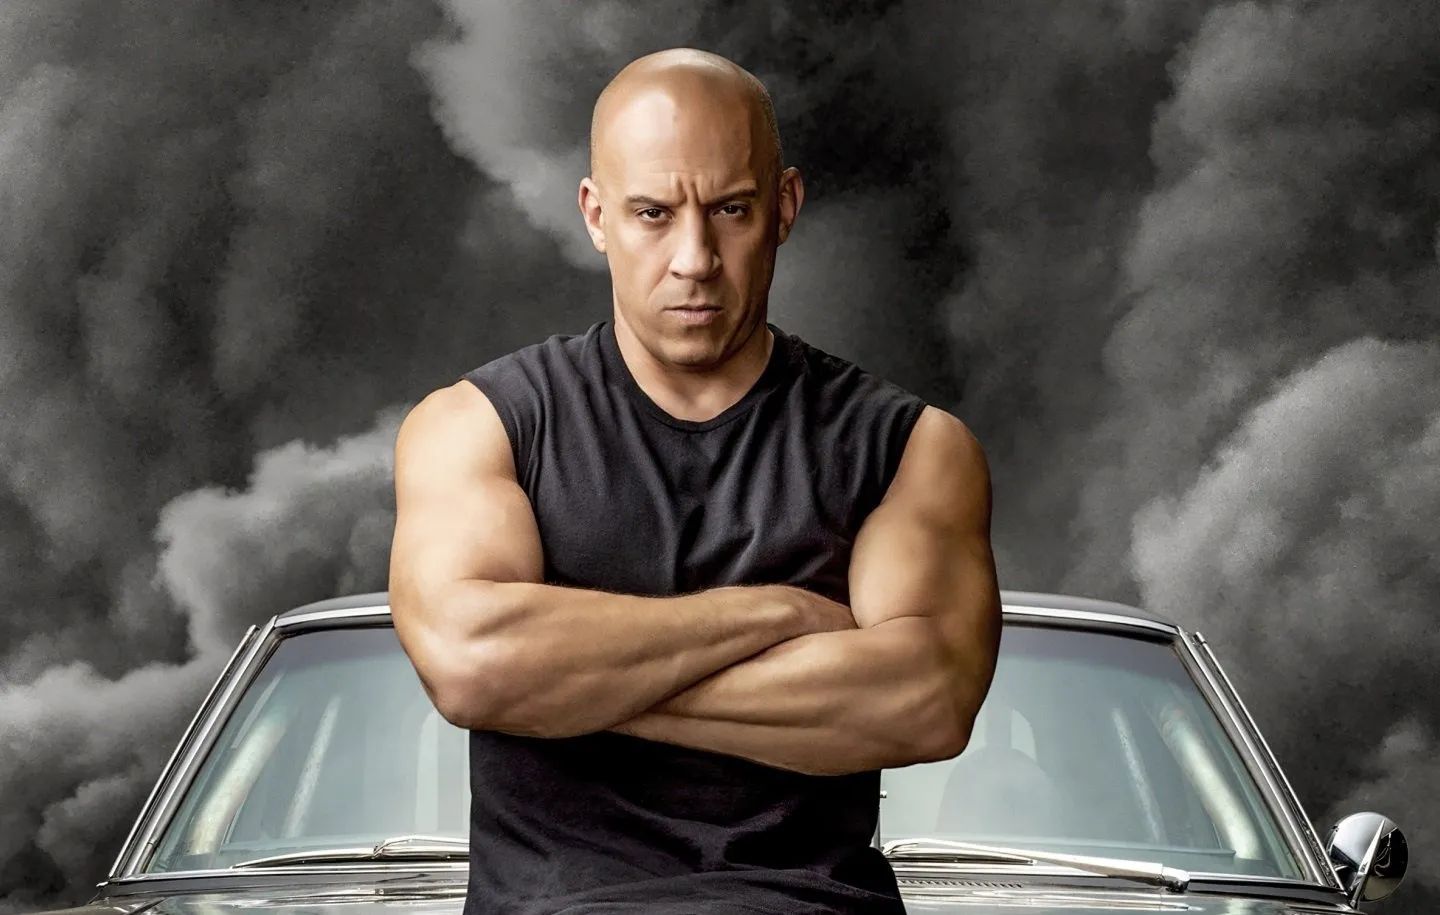 Vin Diesel from Fast and Furious accused of sexual abuse He denies the charges - Gossibox.com